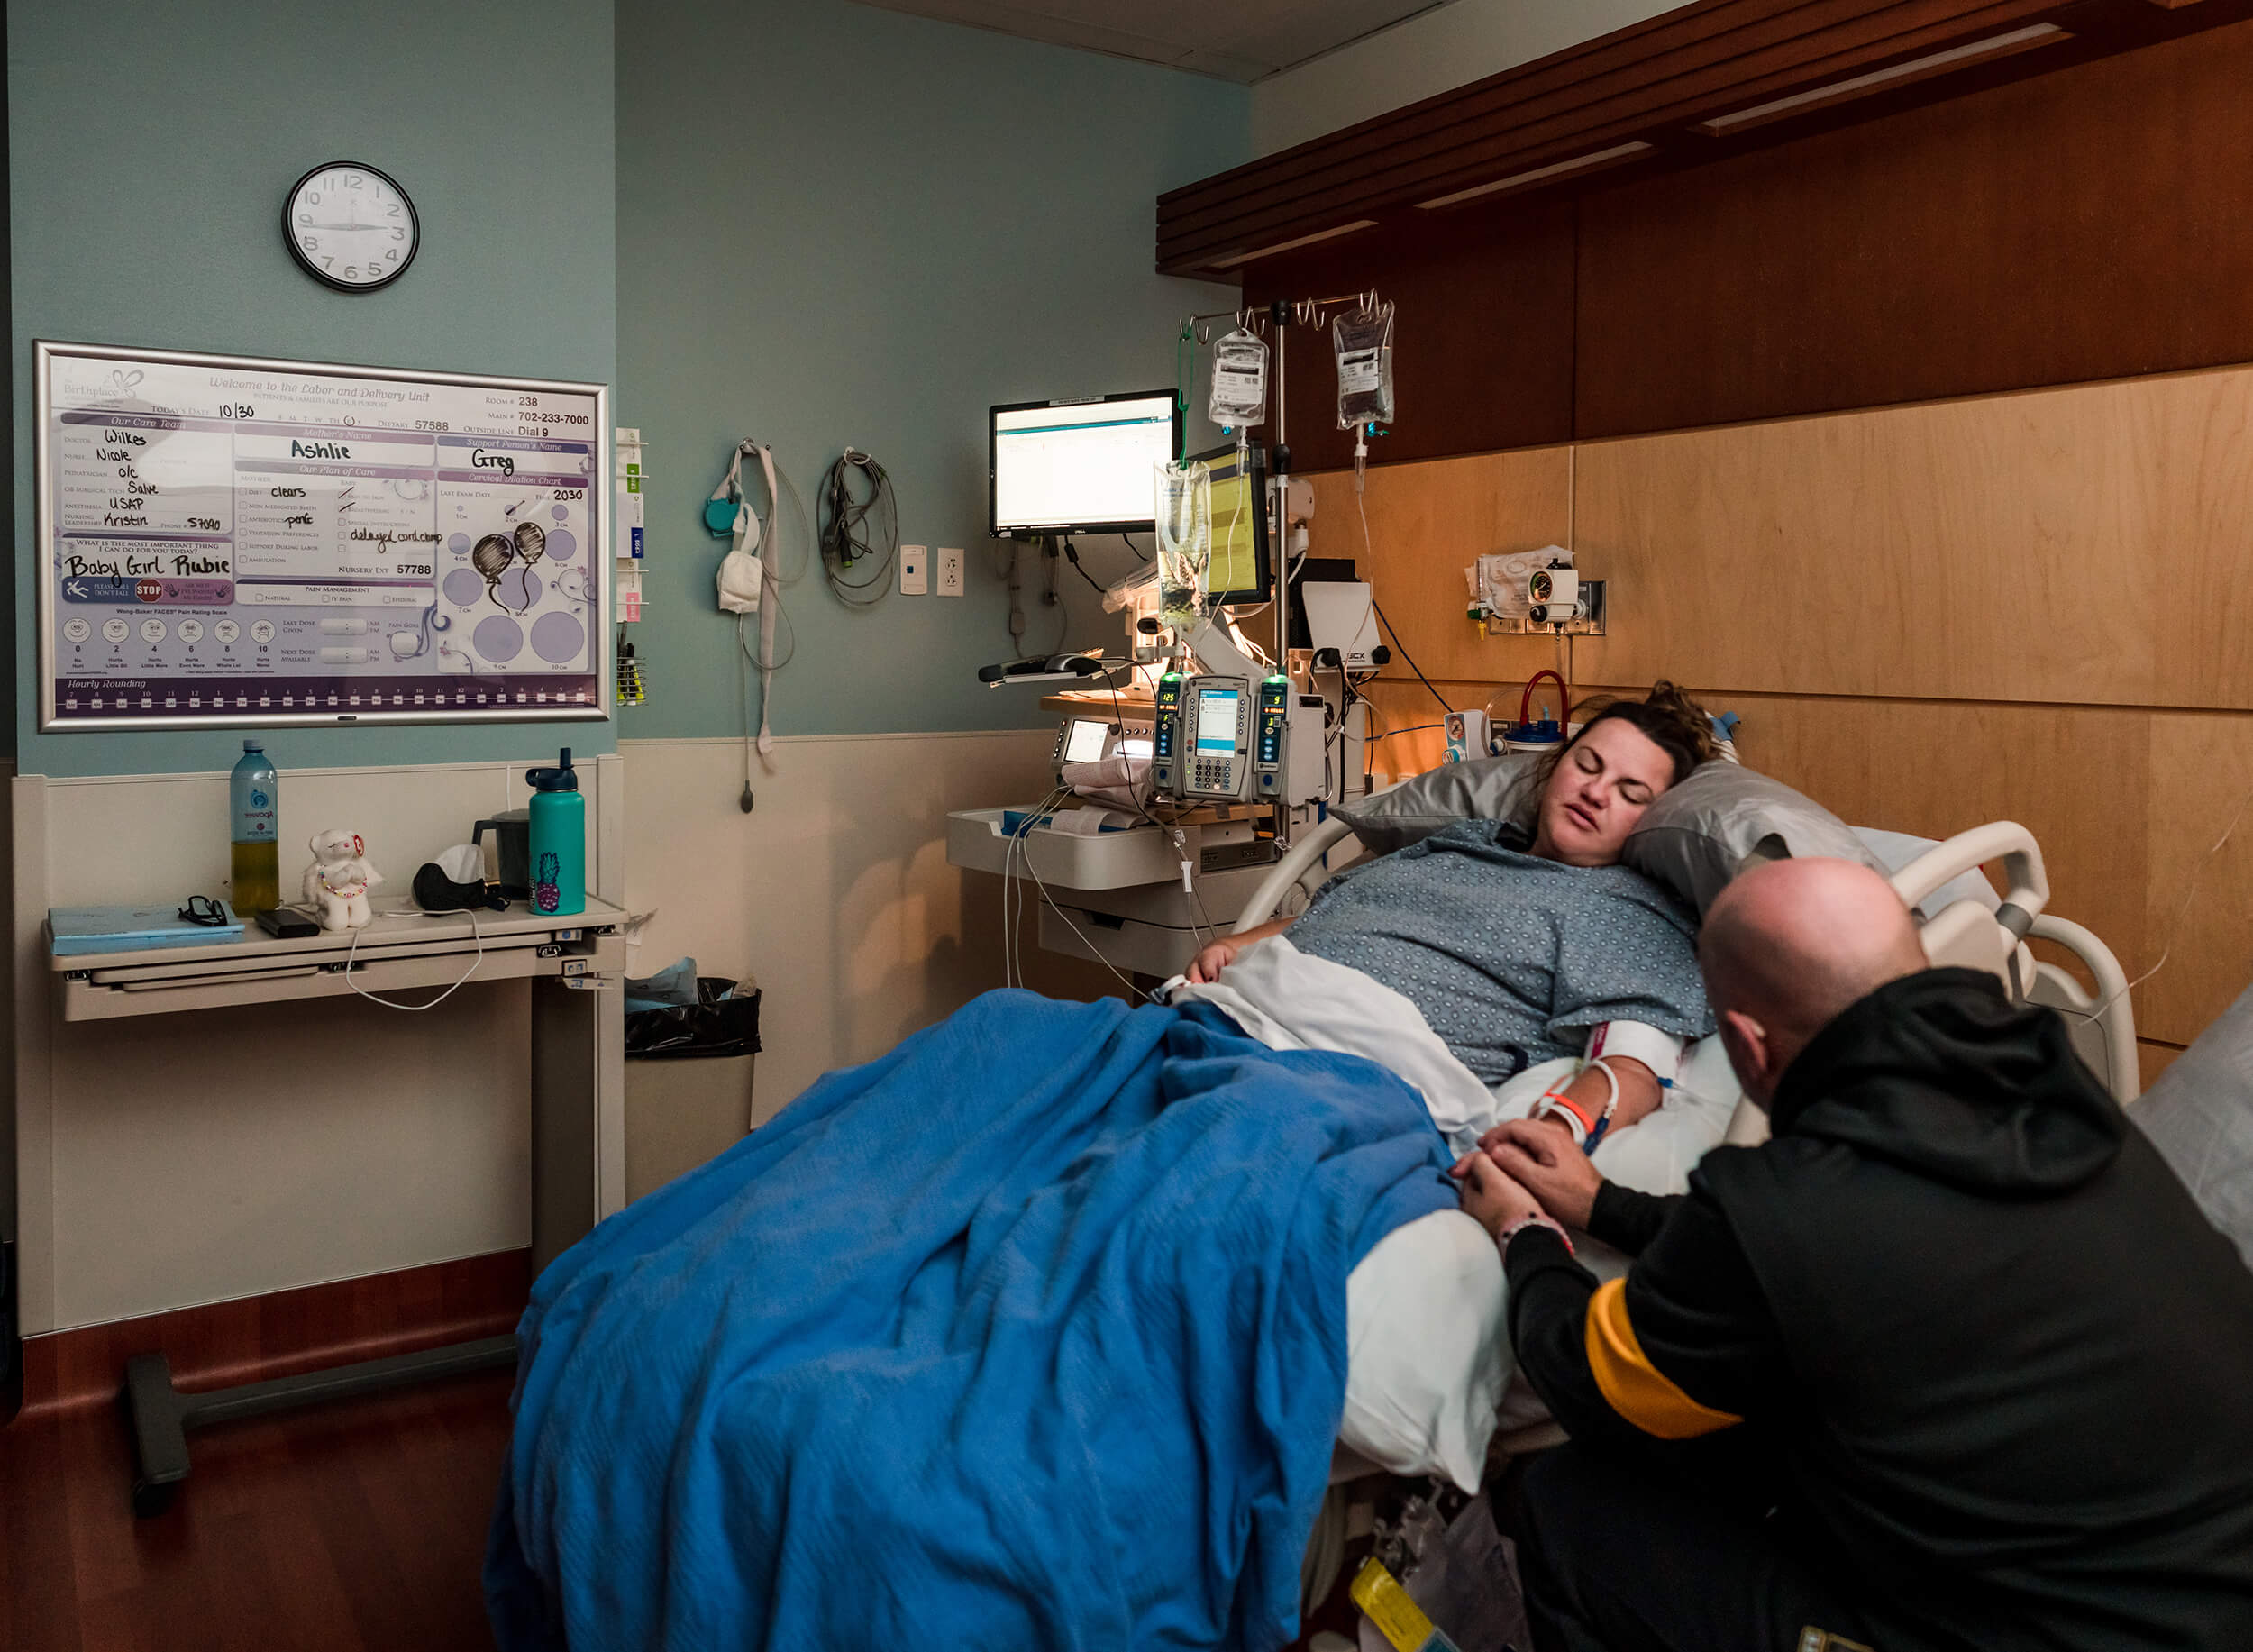 tender moments between husband and wife in hospital while wife labors